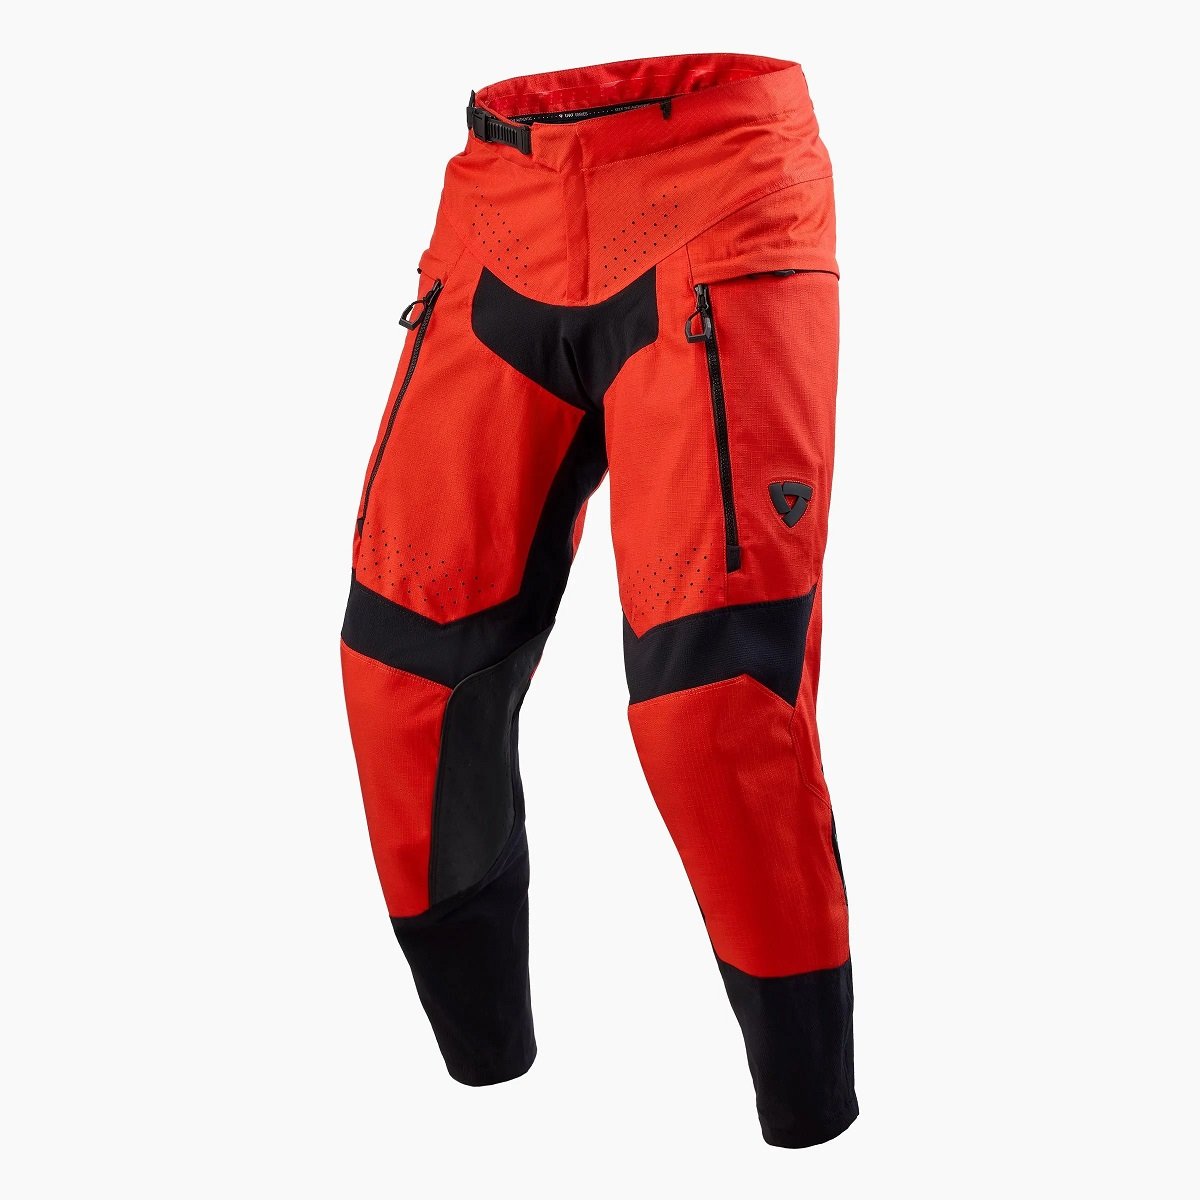 Image of REV'IT! Peninsula Trousers Red Motorcycle Pants Size M ID 8700001348997